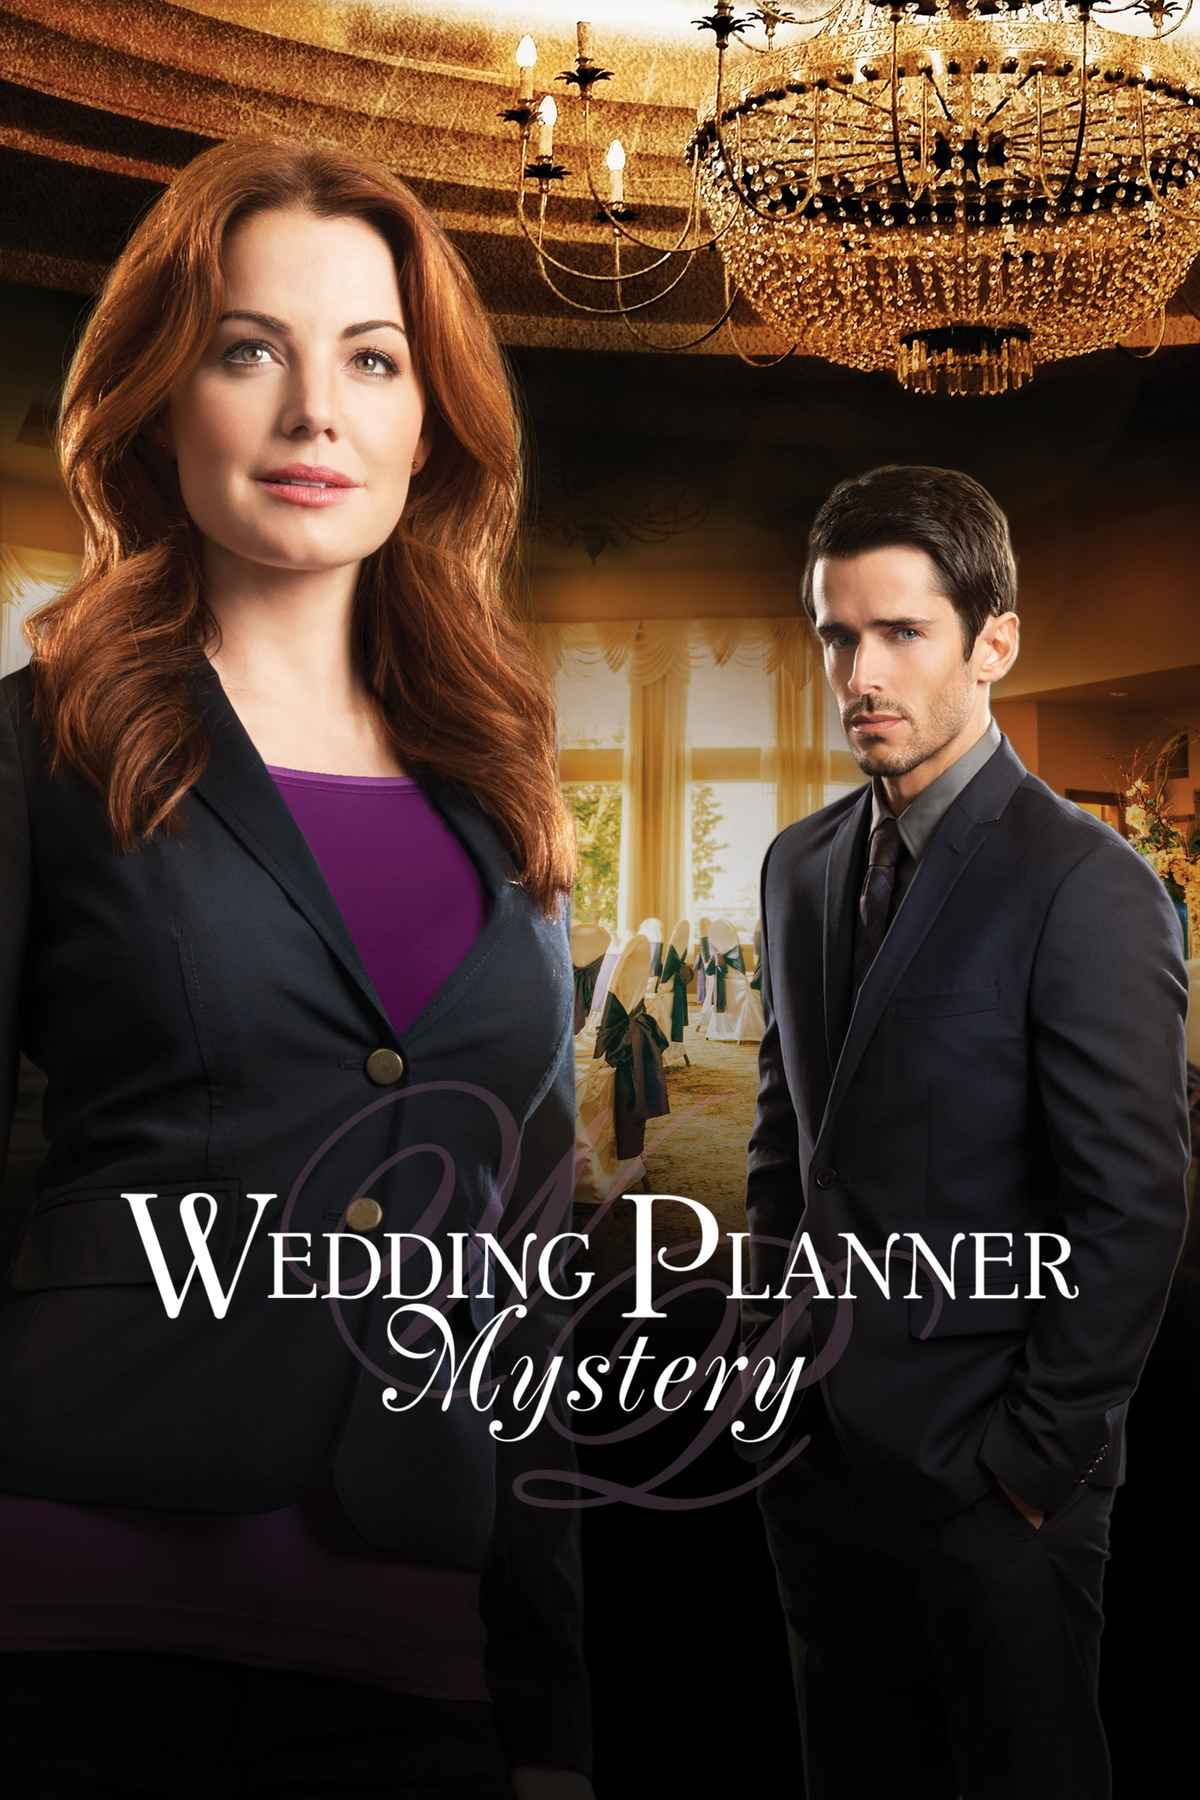 watch wedding planner mystery prime video on wedding planner mystery watch online